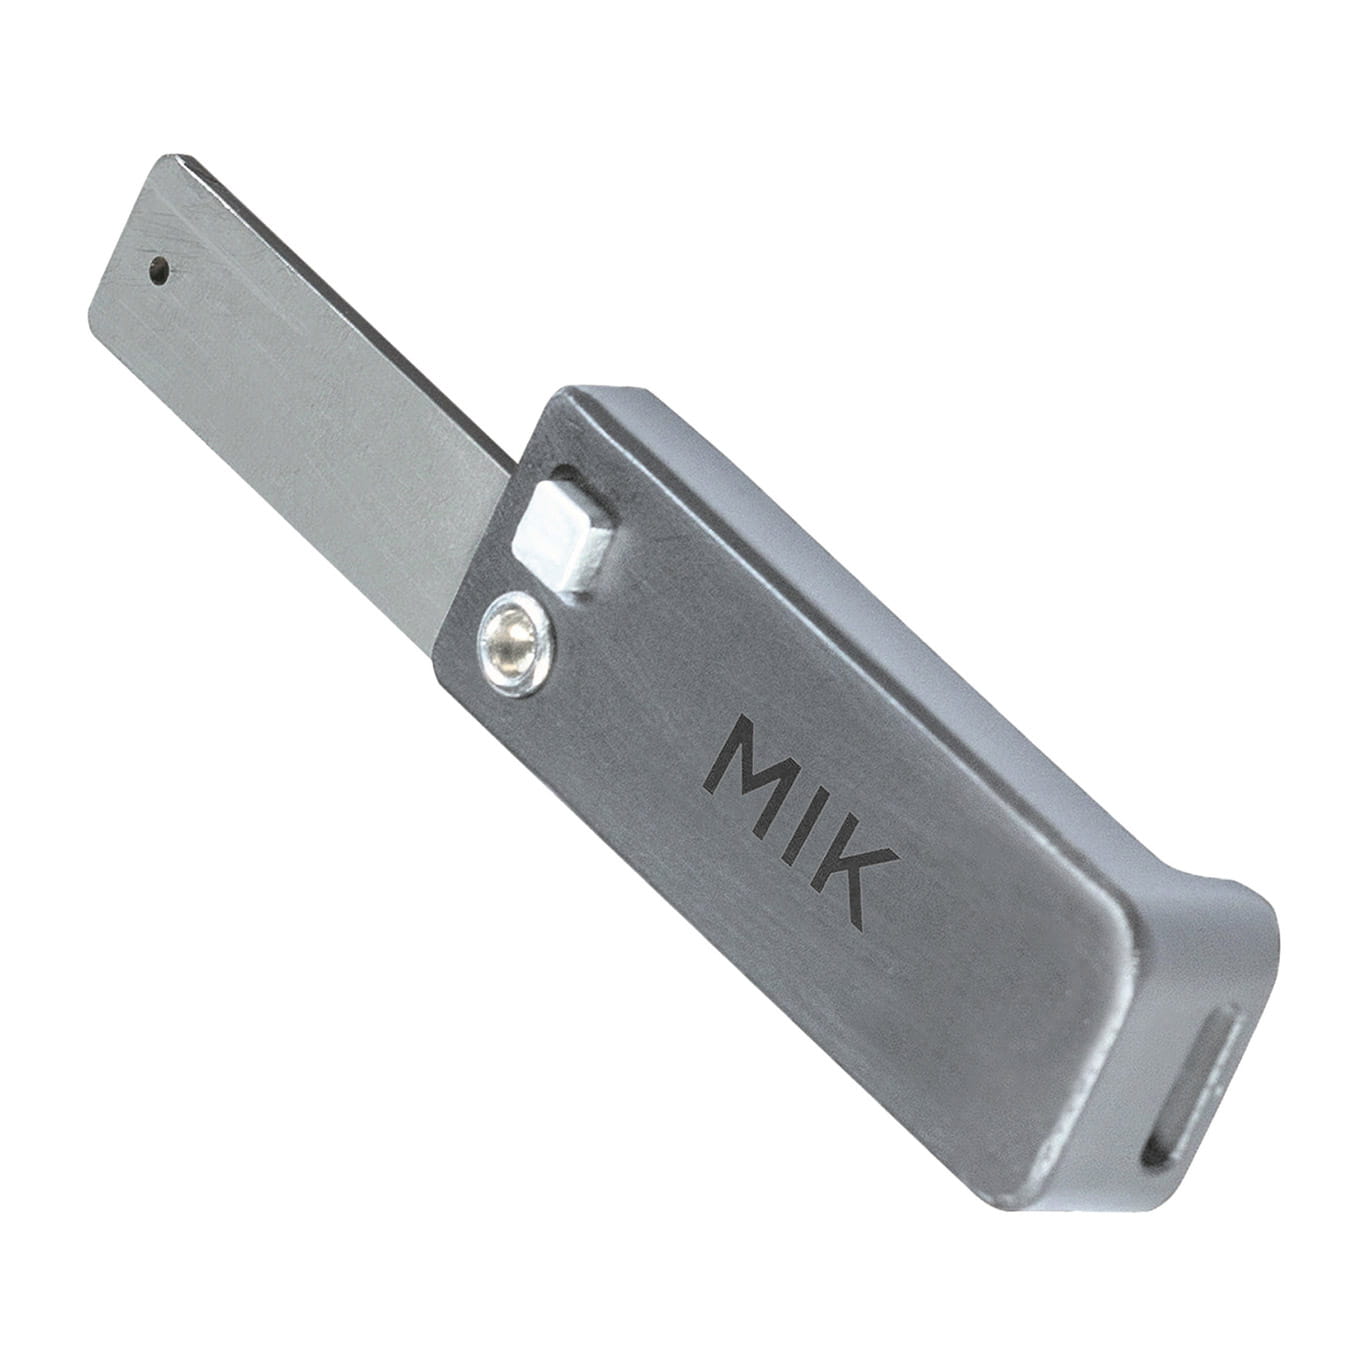 Basil MIK Stick Replacement Key for MIK System 70678